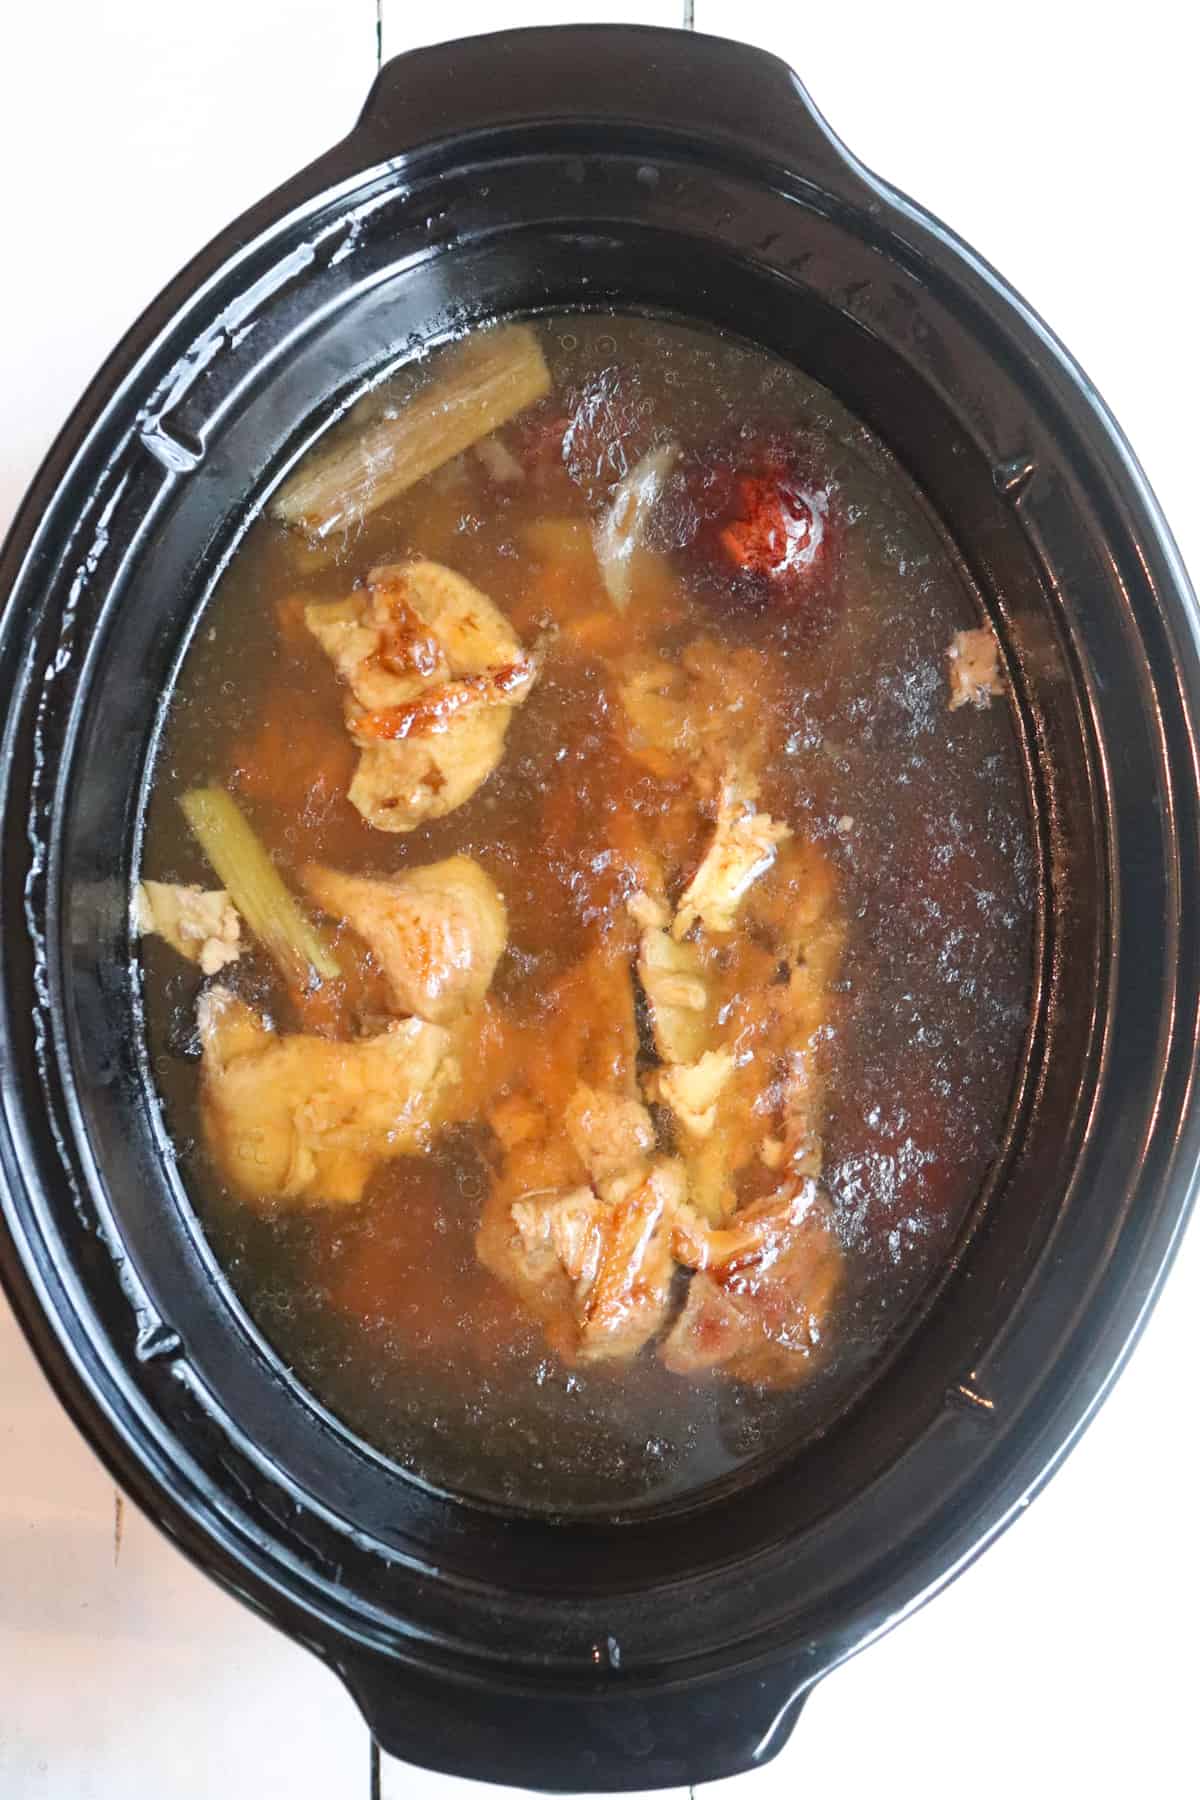 slow cooker bone broth after it has cooked full cooking time.